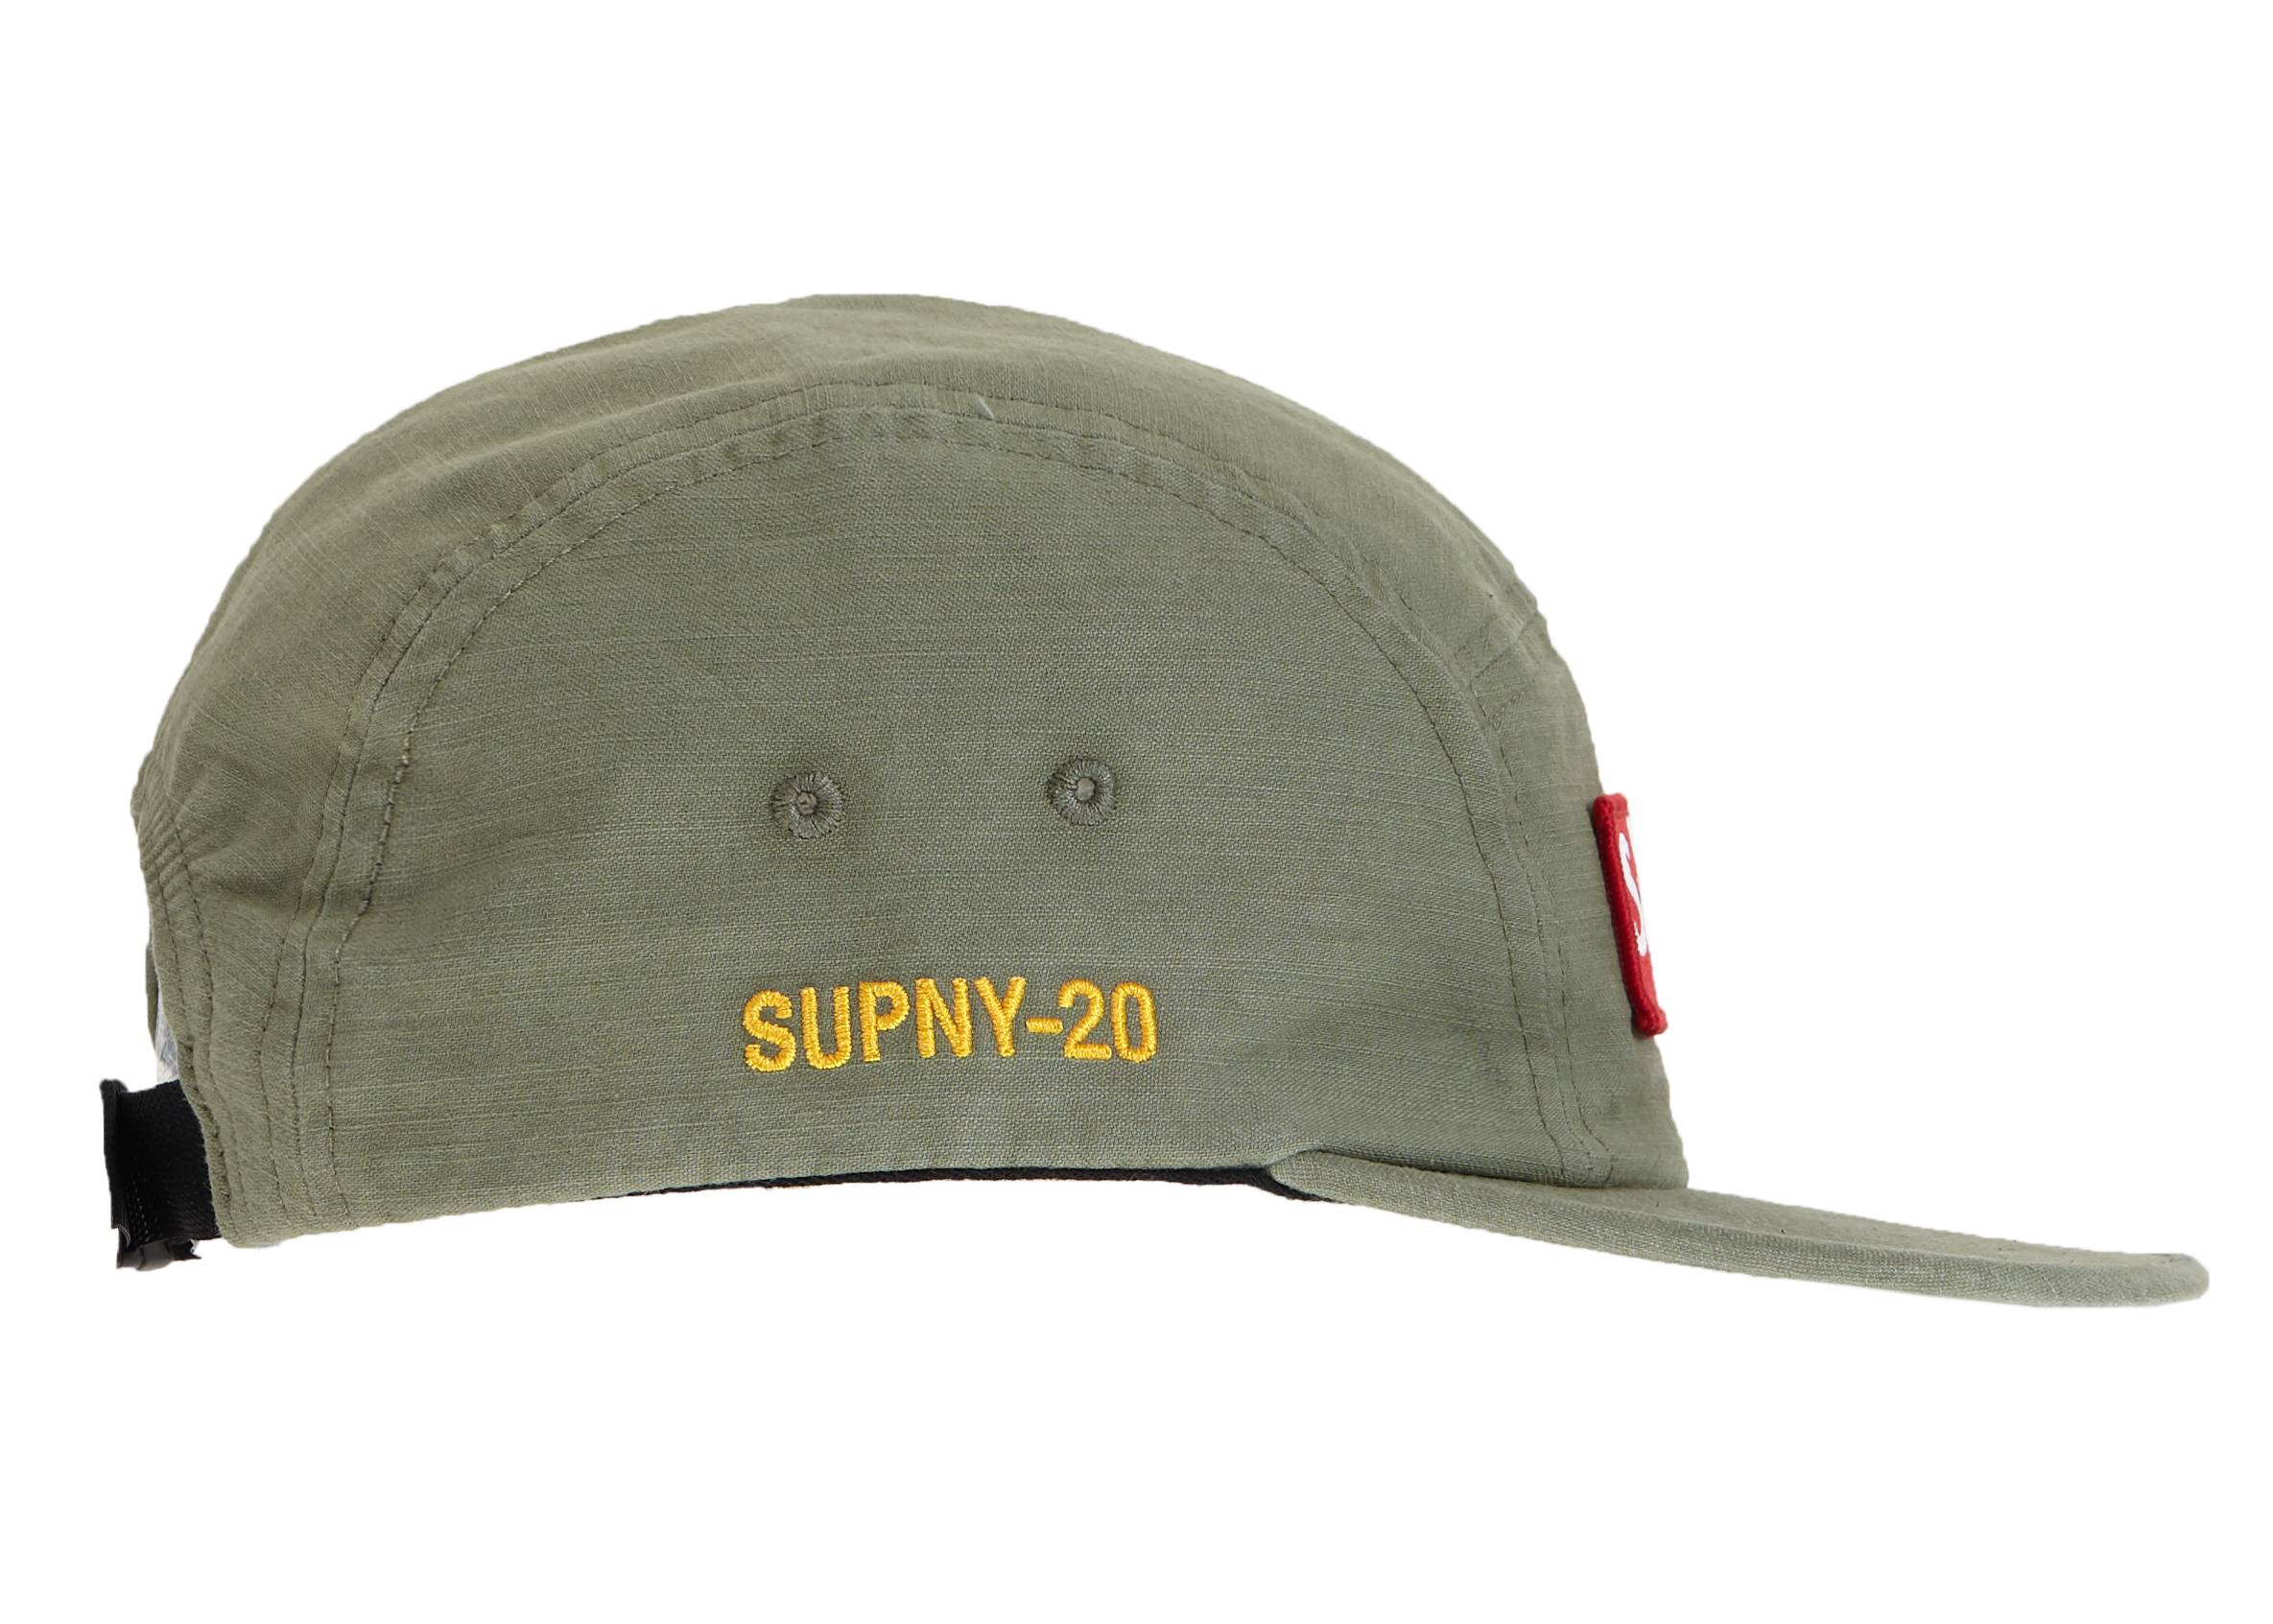 Supreme Military Camp Cap (SS21) Olive